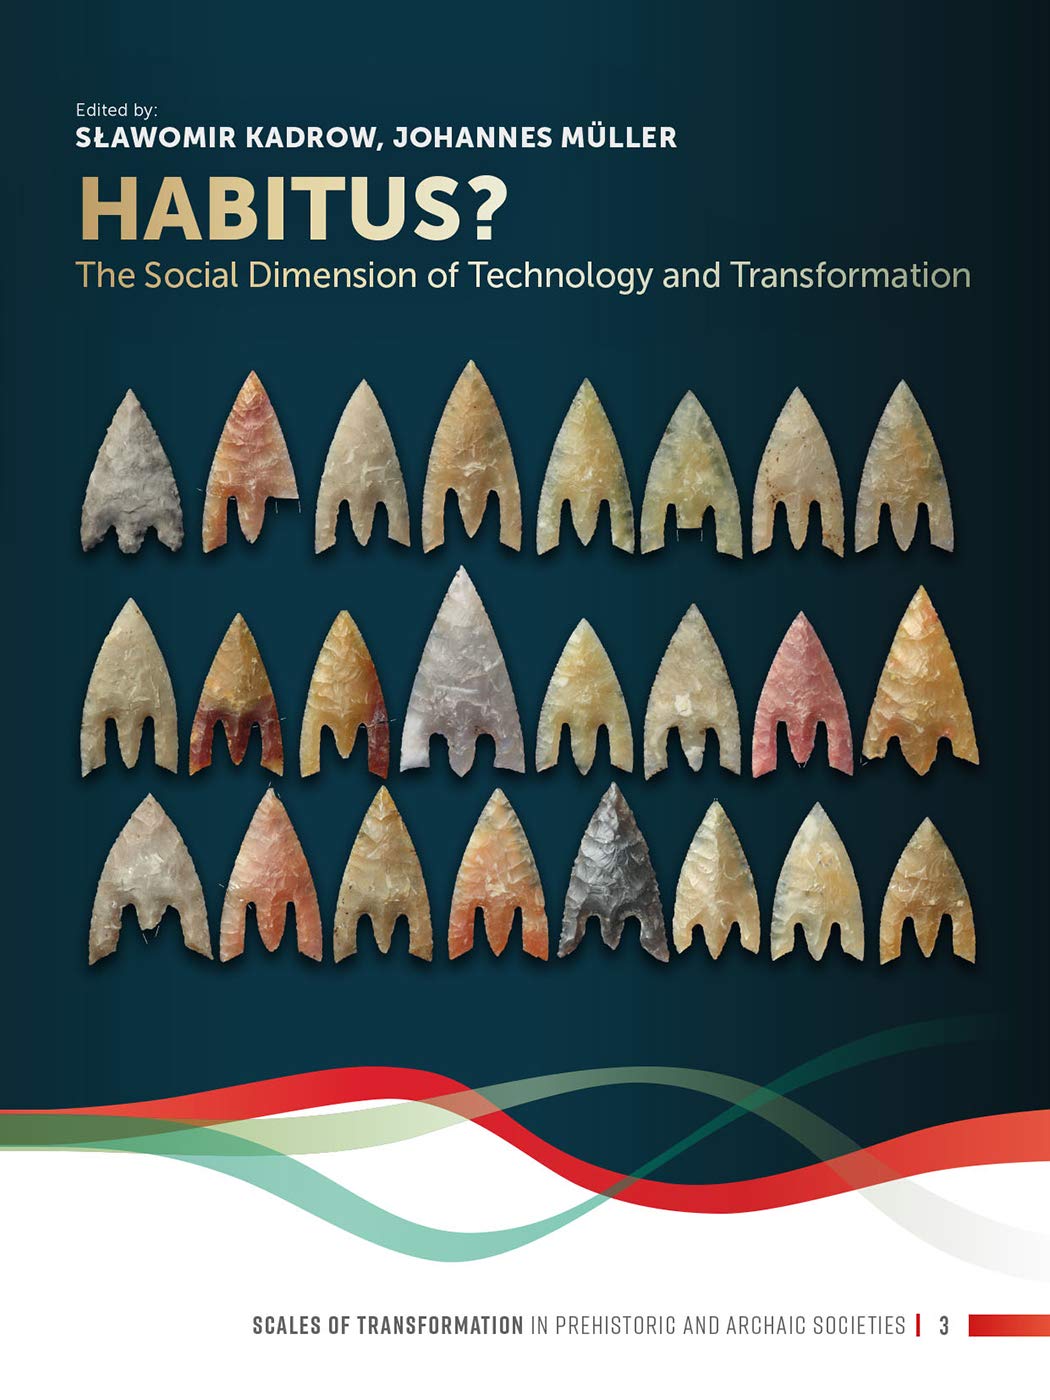 Habitus ? The Social Dimension of Technology and Transformation, 2019, 232 p.